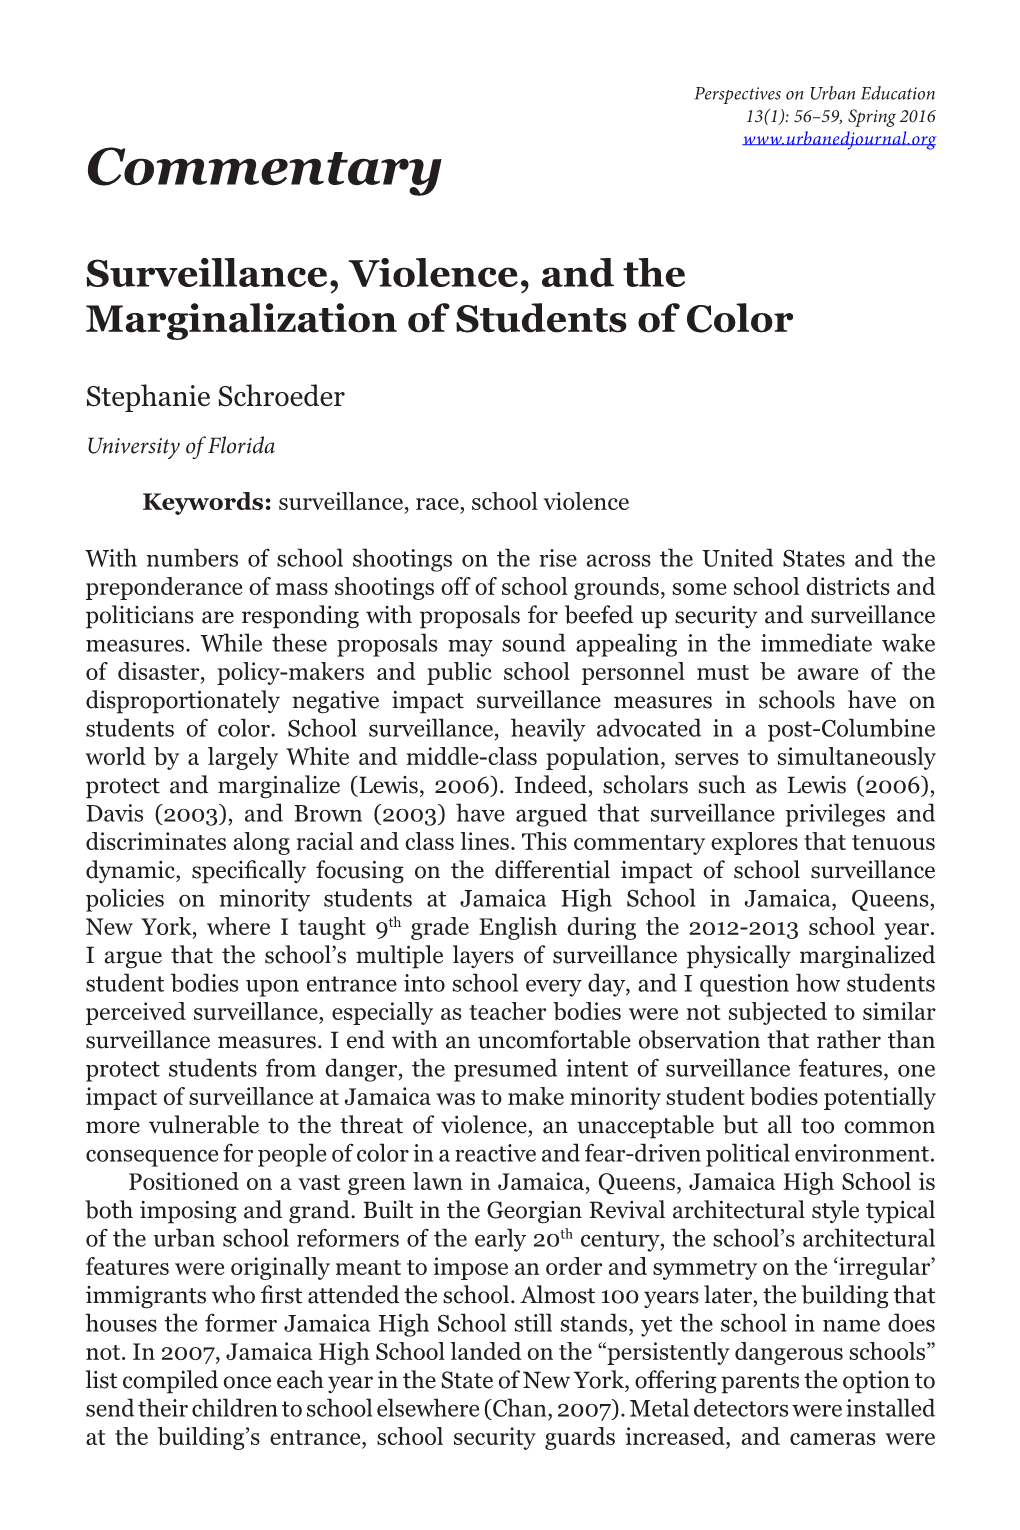 Commentary Surveillance, Violence, and the Marginalization of Students